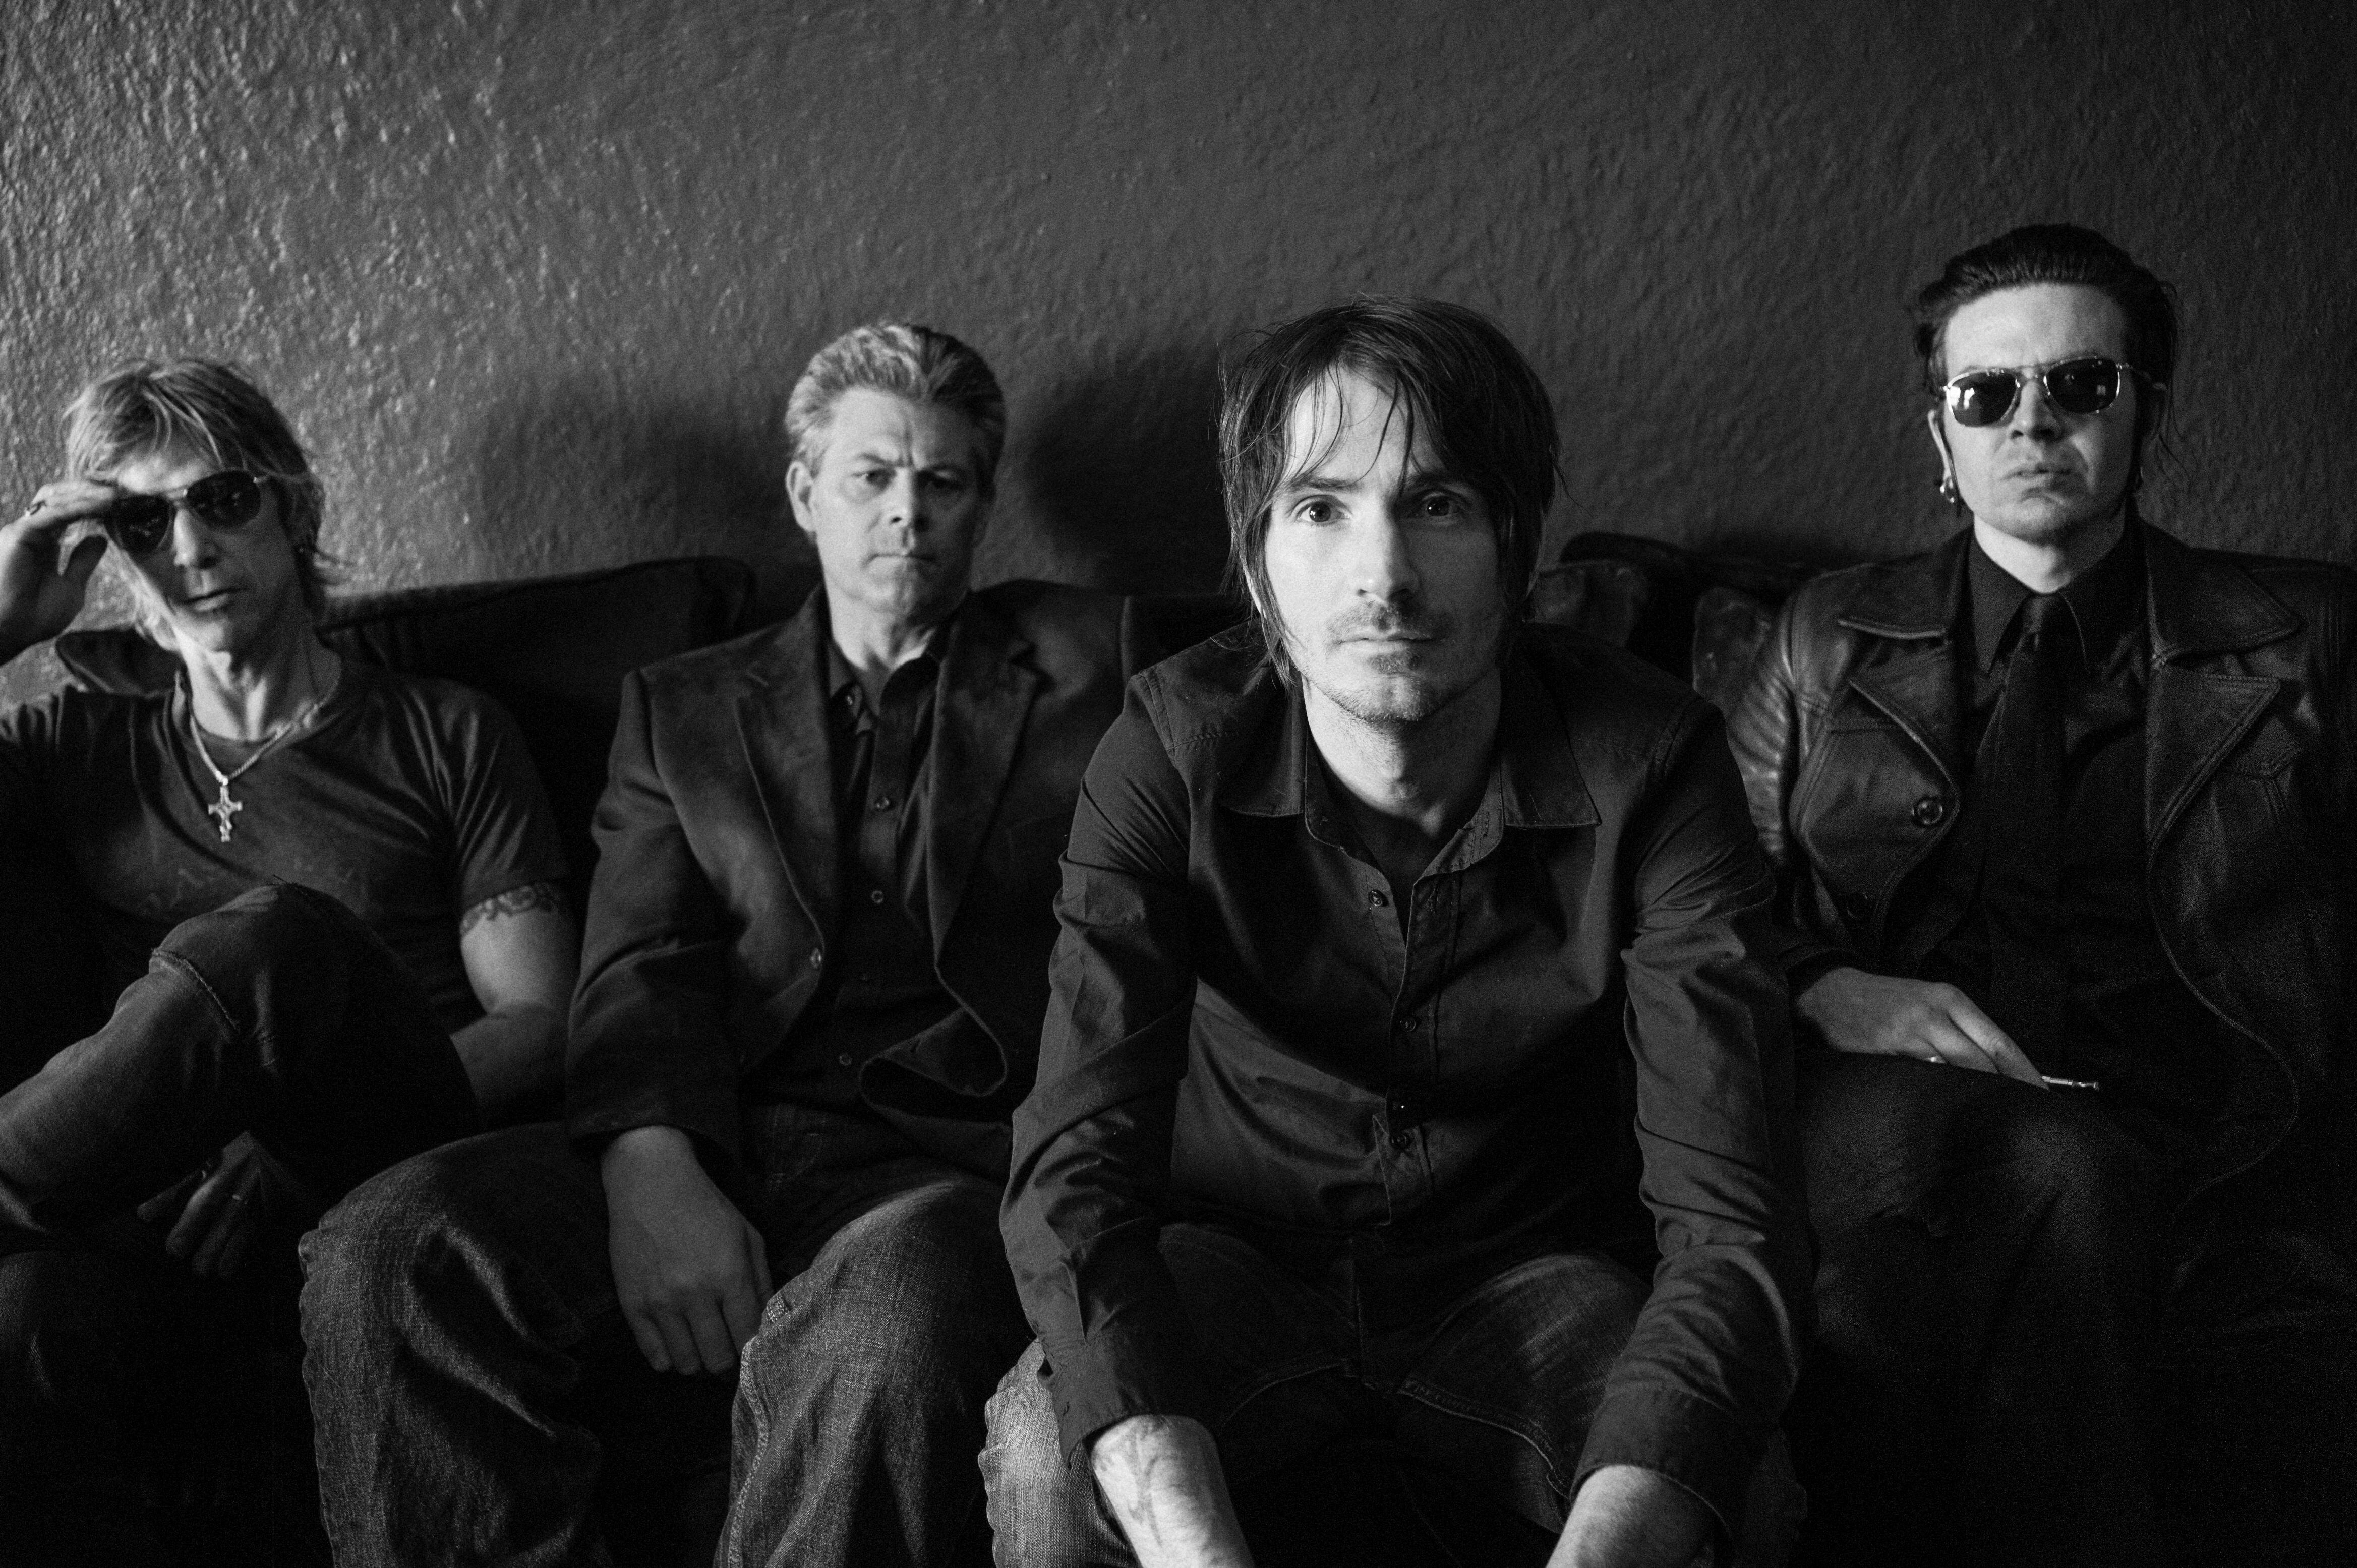 Seattle supergroup Walking Papers. Left to right: Duff McKagan, Barrett Martin, Jeff Angell, and Ben Anderson. (photo by Charles Peterson)